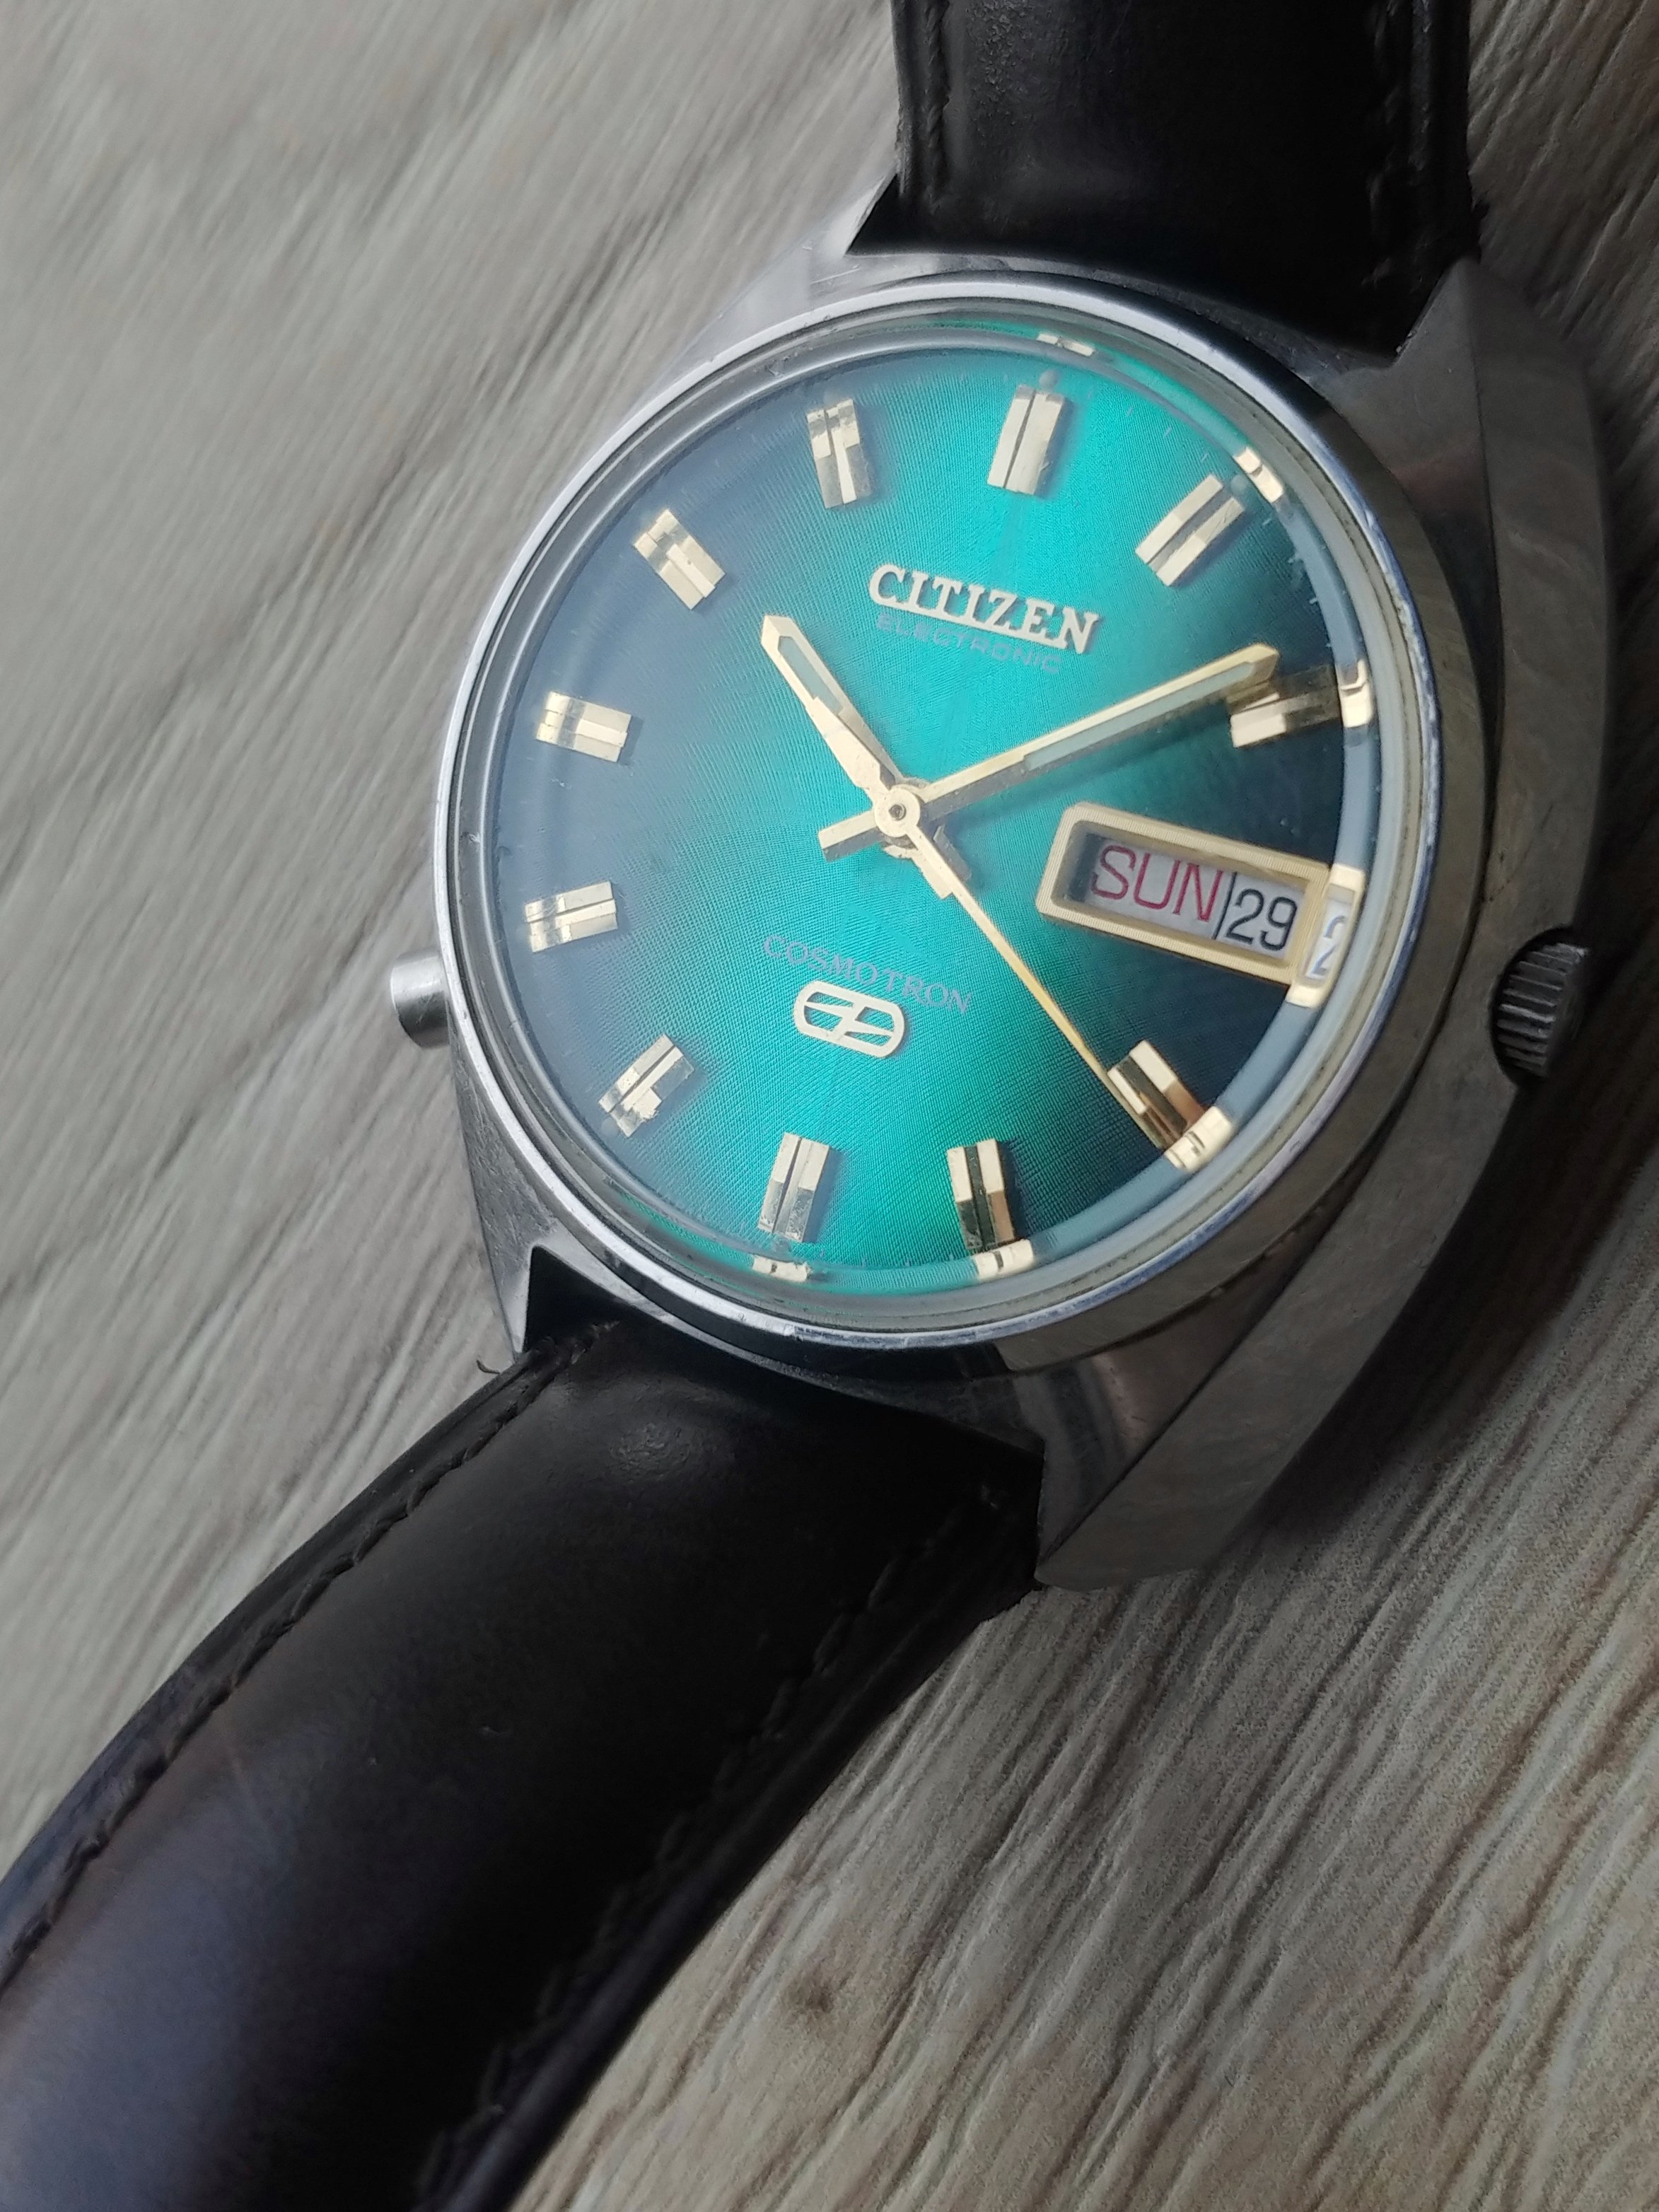 Citizen Cosmotron — Affordable Wrist Time